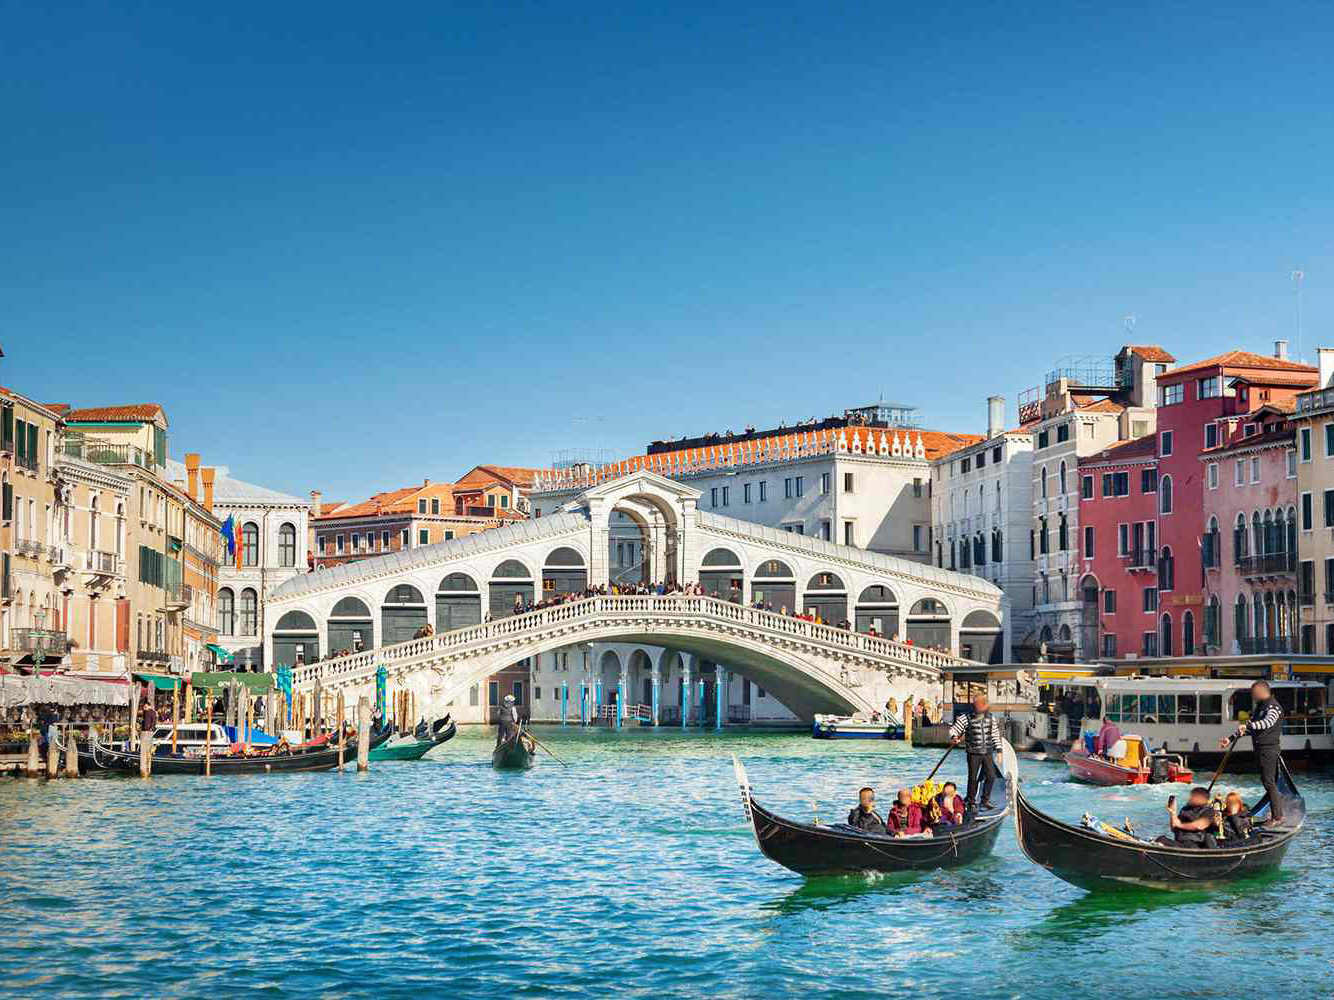 Most Popular Tourist Attractions in Italy - Gondola Ride Through Venetian Canals